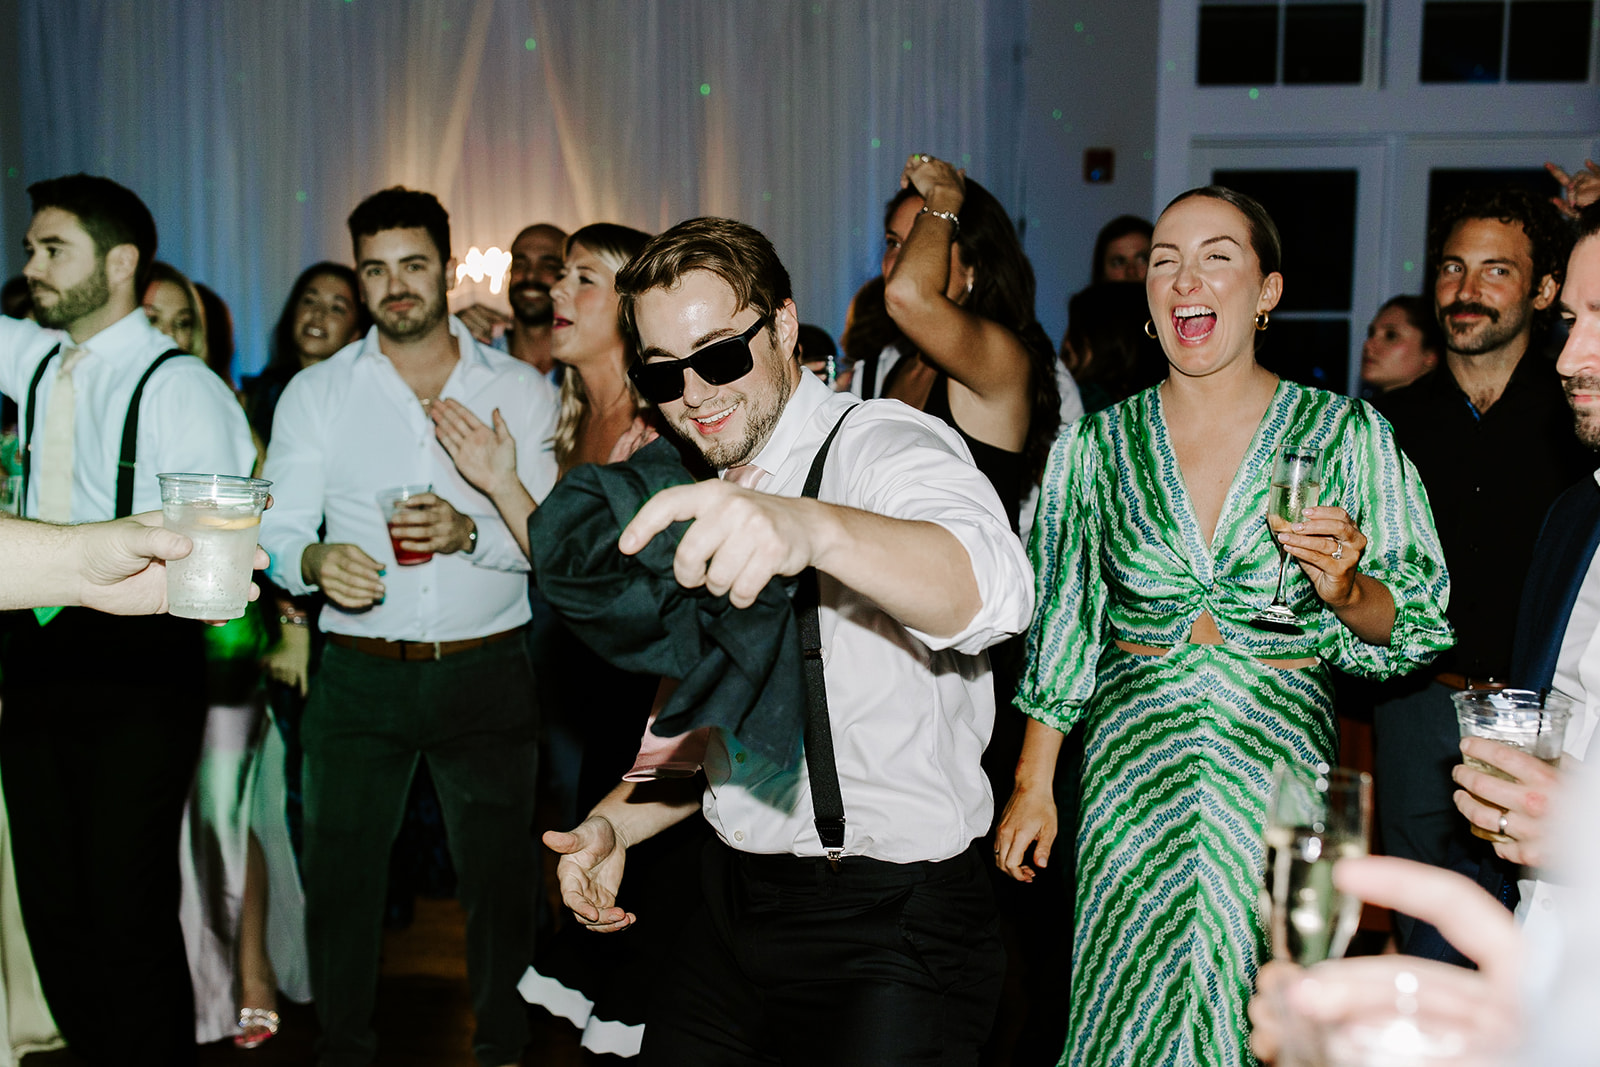 Guests dance and celebrate the perfect New England wedding day